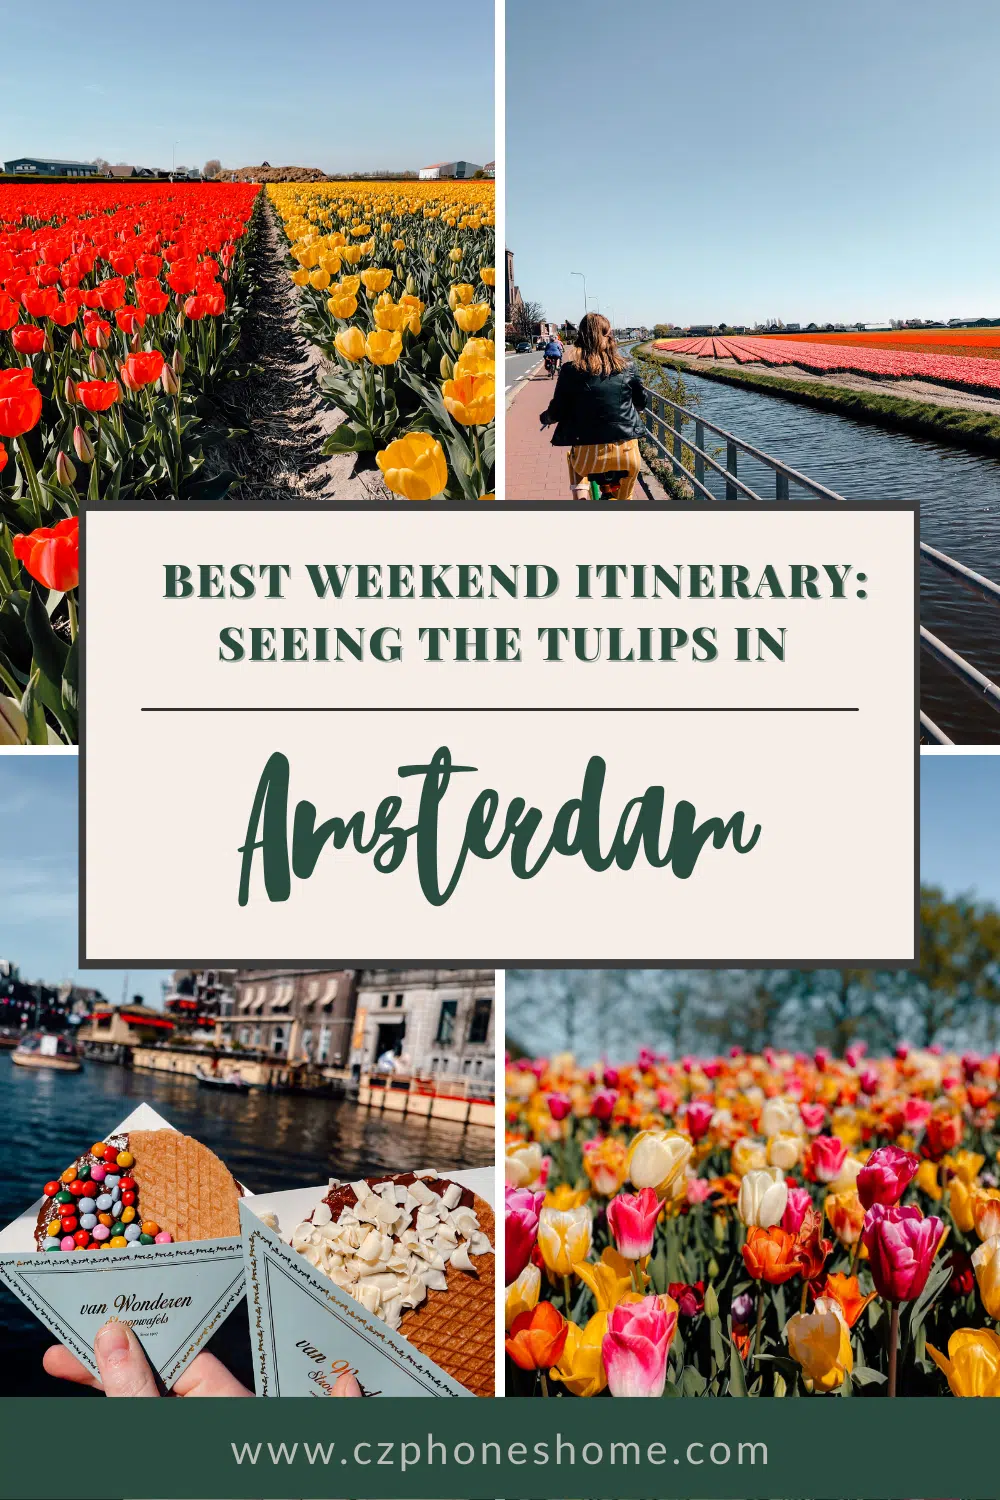 Best weekend itinerary for seeing the tulips in Amsterdam